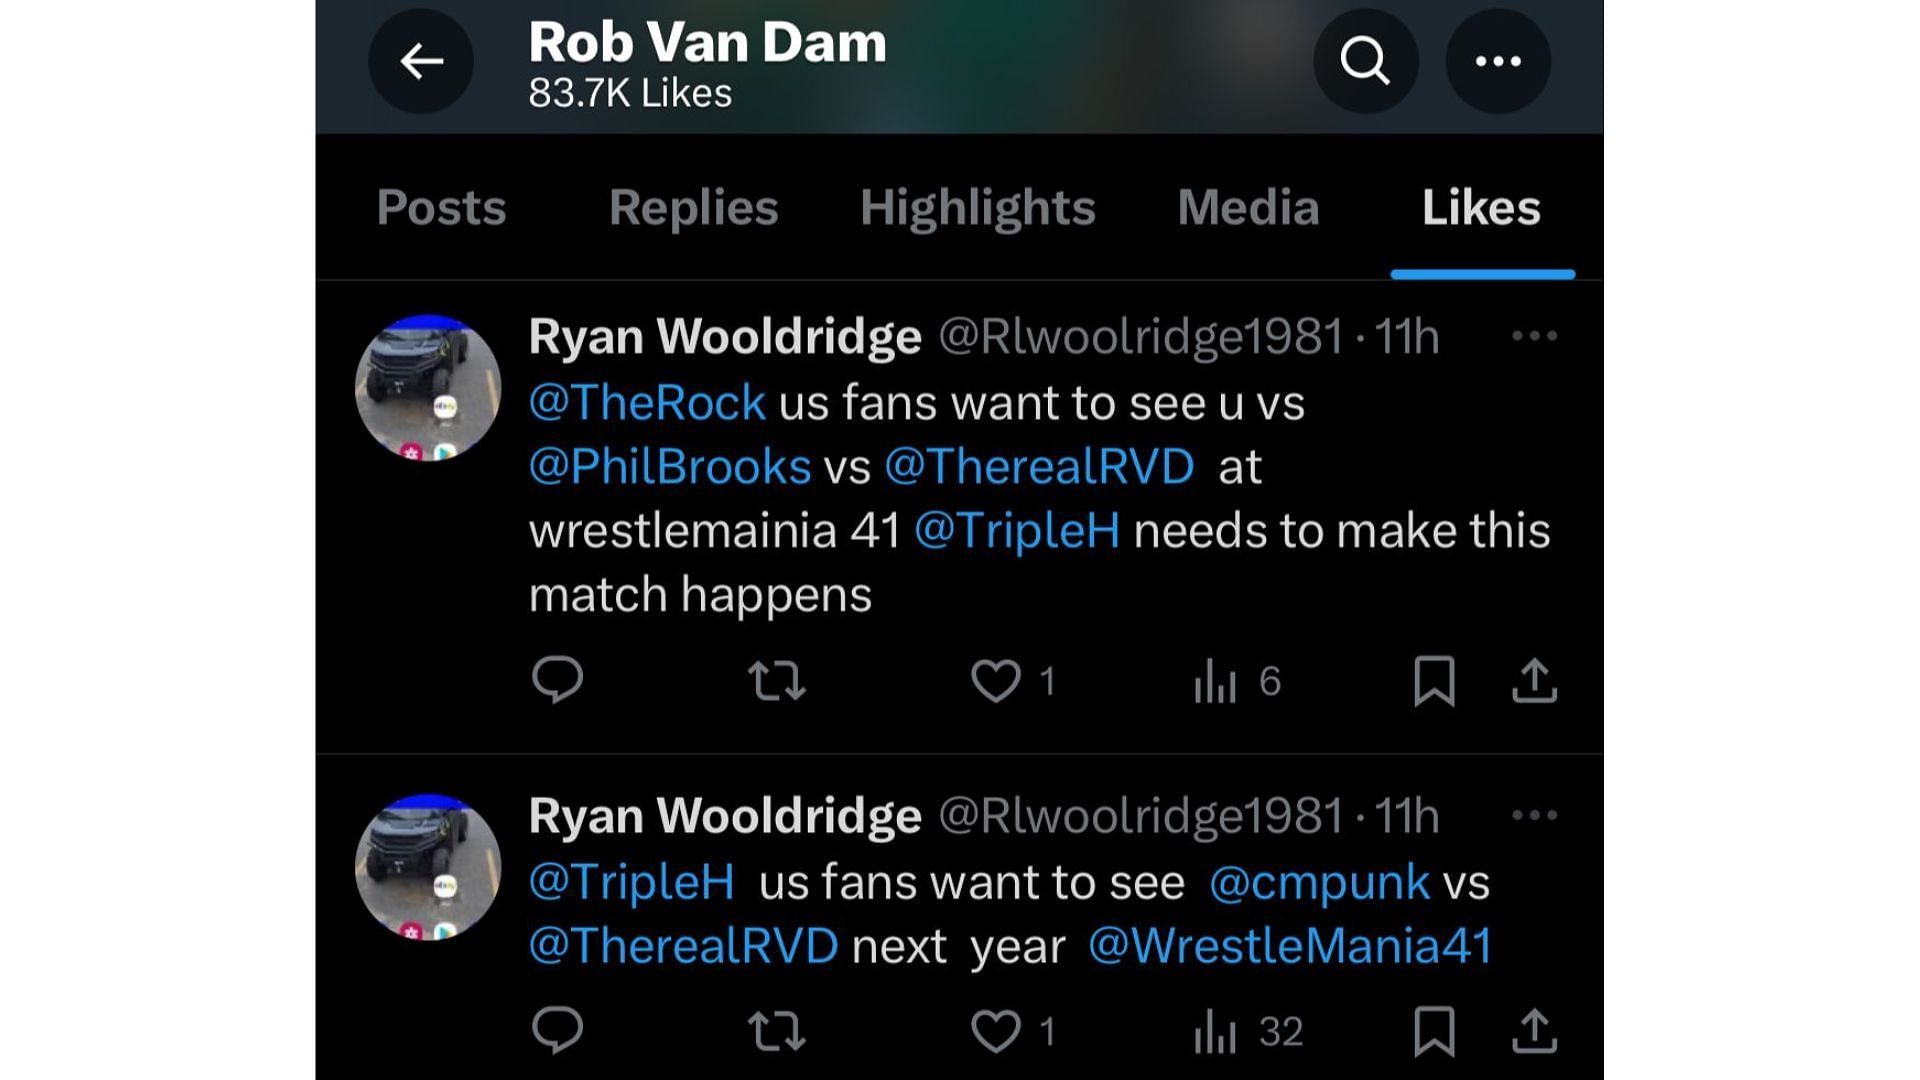 Rob Van Dam seems to be interested in facing CM Punk at WrestleMania